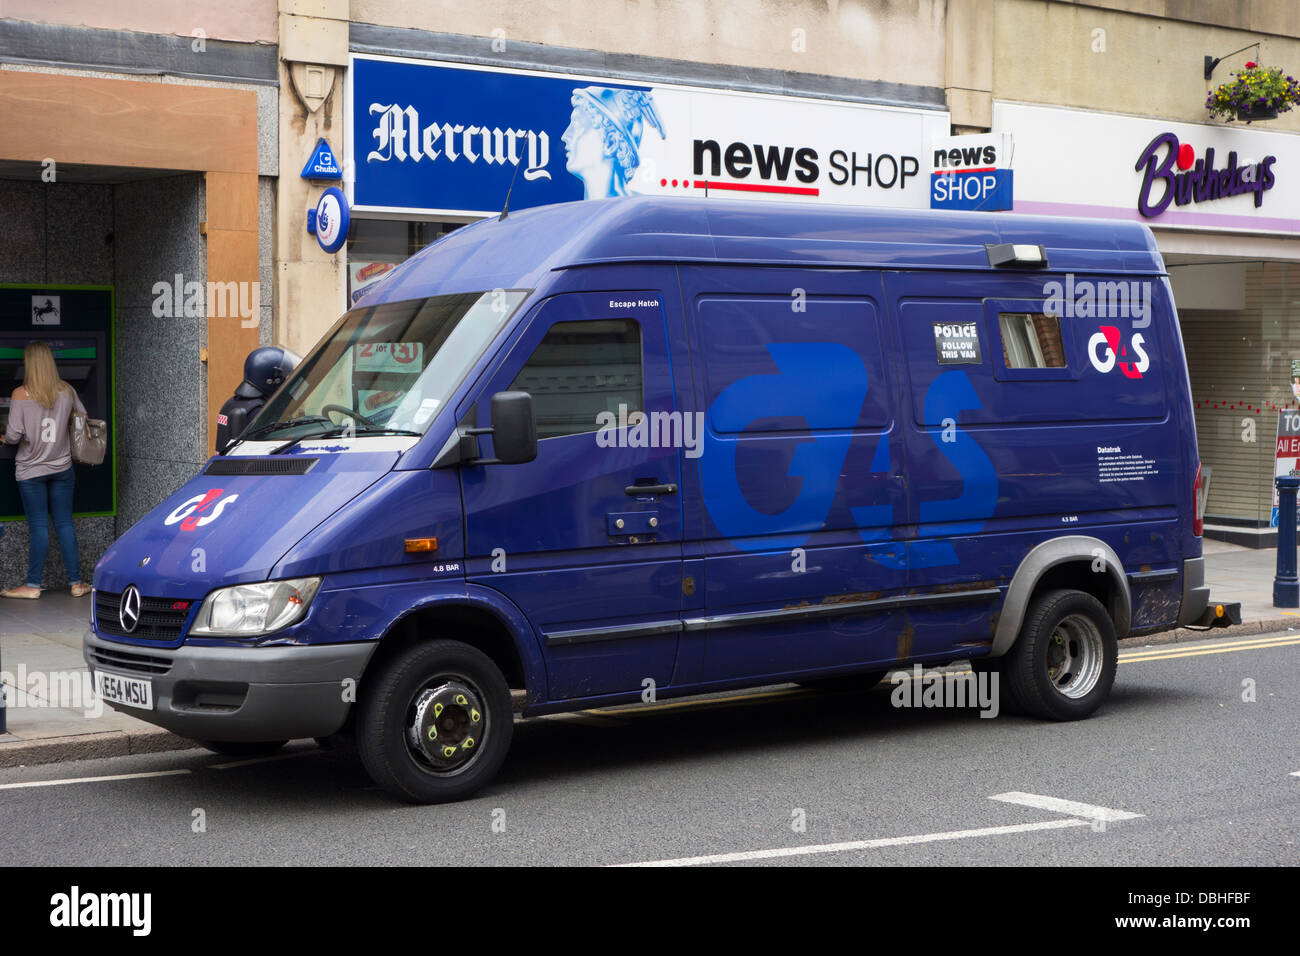 Mindful Labe Scan G4s Security Van High Resolution Stock Photography and Images - Alamy